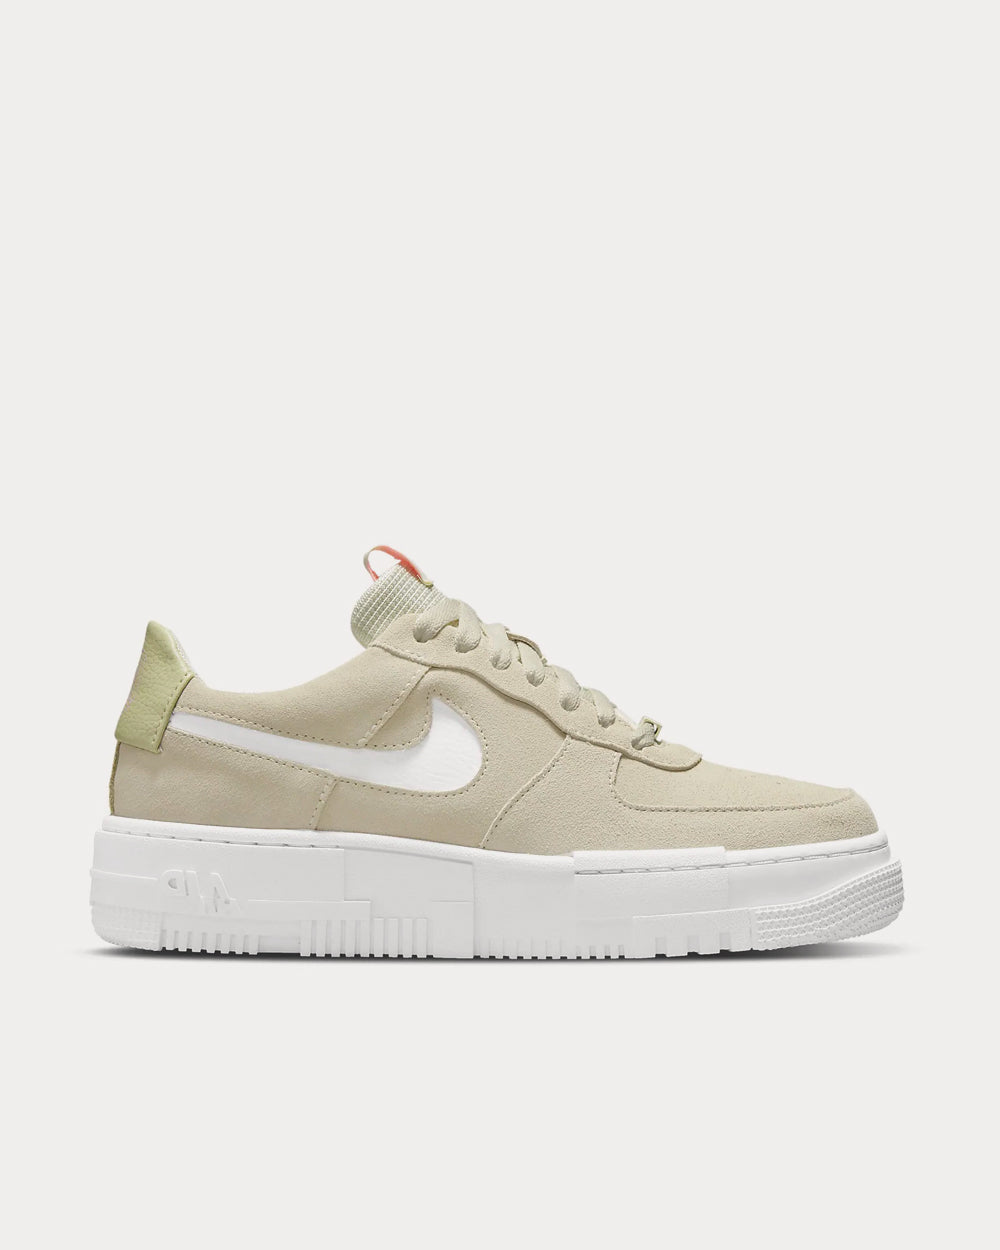 AF-1 Pixel White / Sea Glass / Arctic Punch / Olive Aura Low Top Sneakers